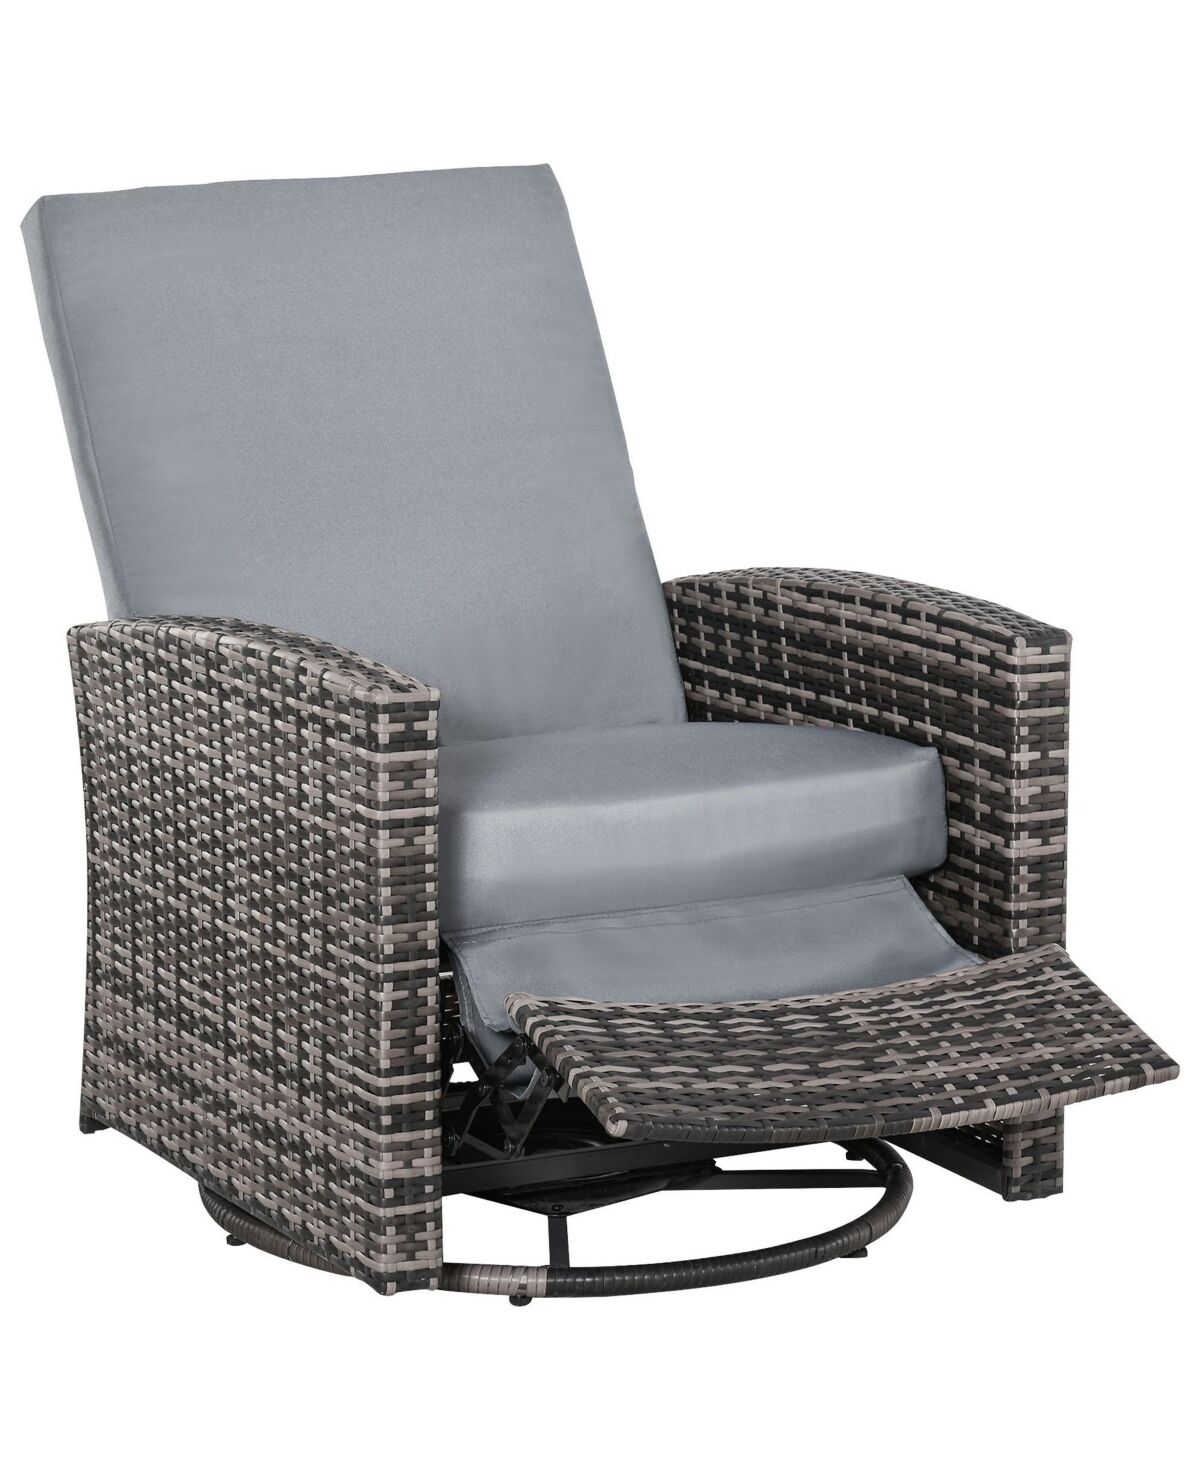 Outsunny Outdoor Wicker Swivel Recliner Chair, Reclining Backrest, Lifting Footrest, 360° Rotating Basic, Water Resistant Cushions for Patio, Grey - G